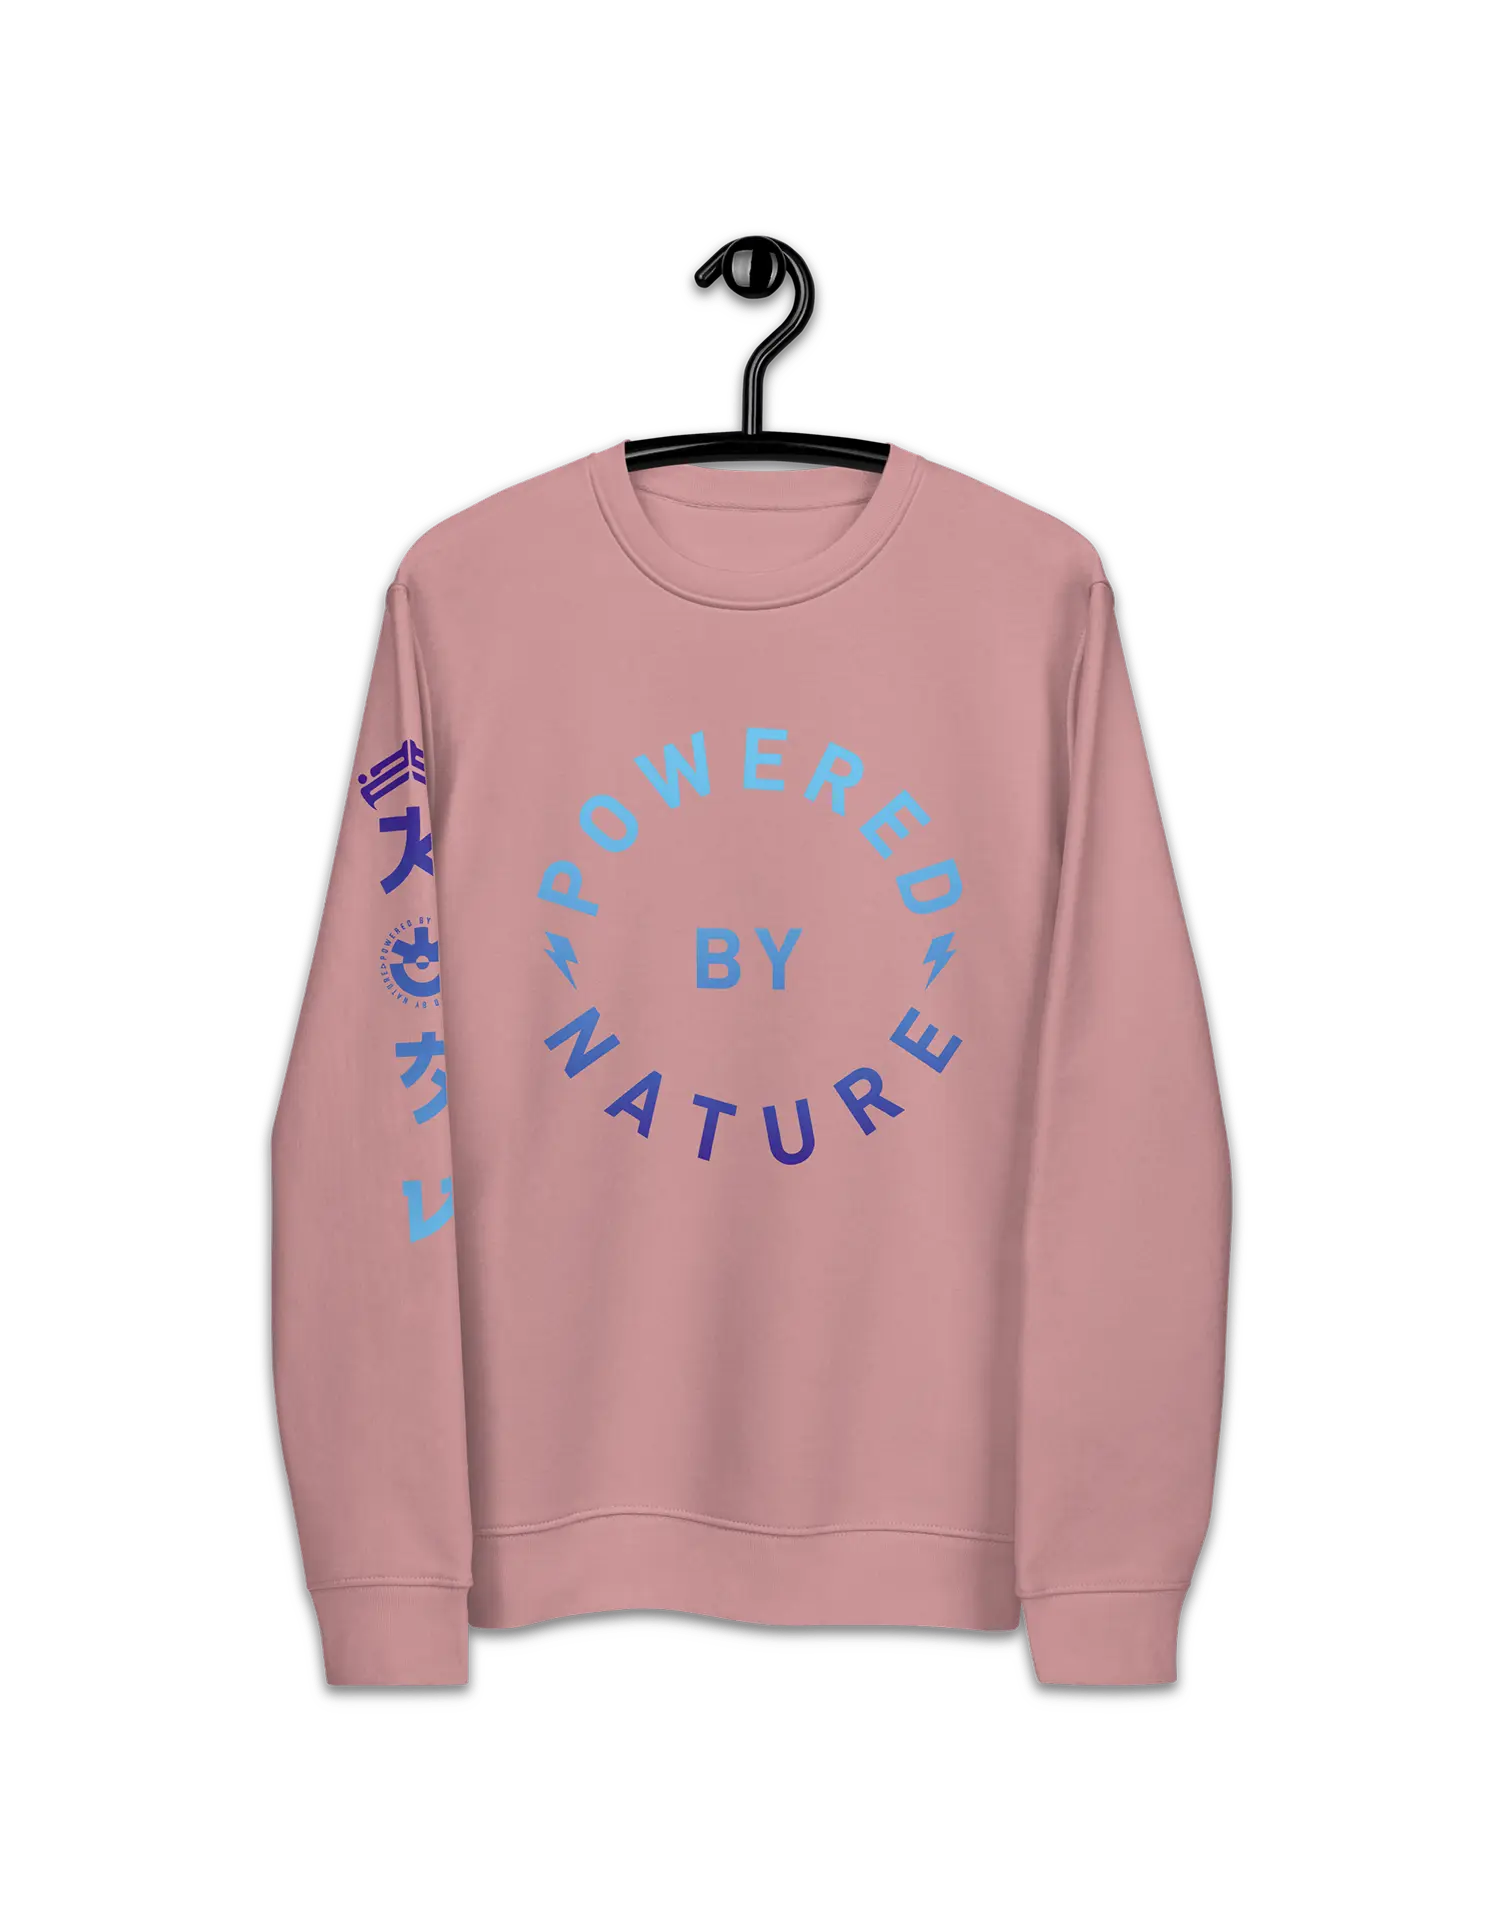 Powered by Nature premium Eco-friendly Canyon Pink Sweater by KOAV